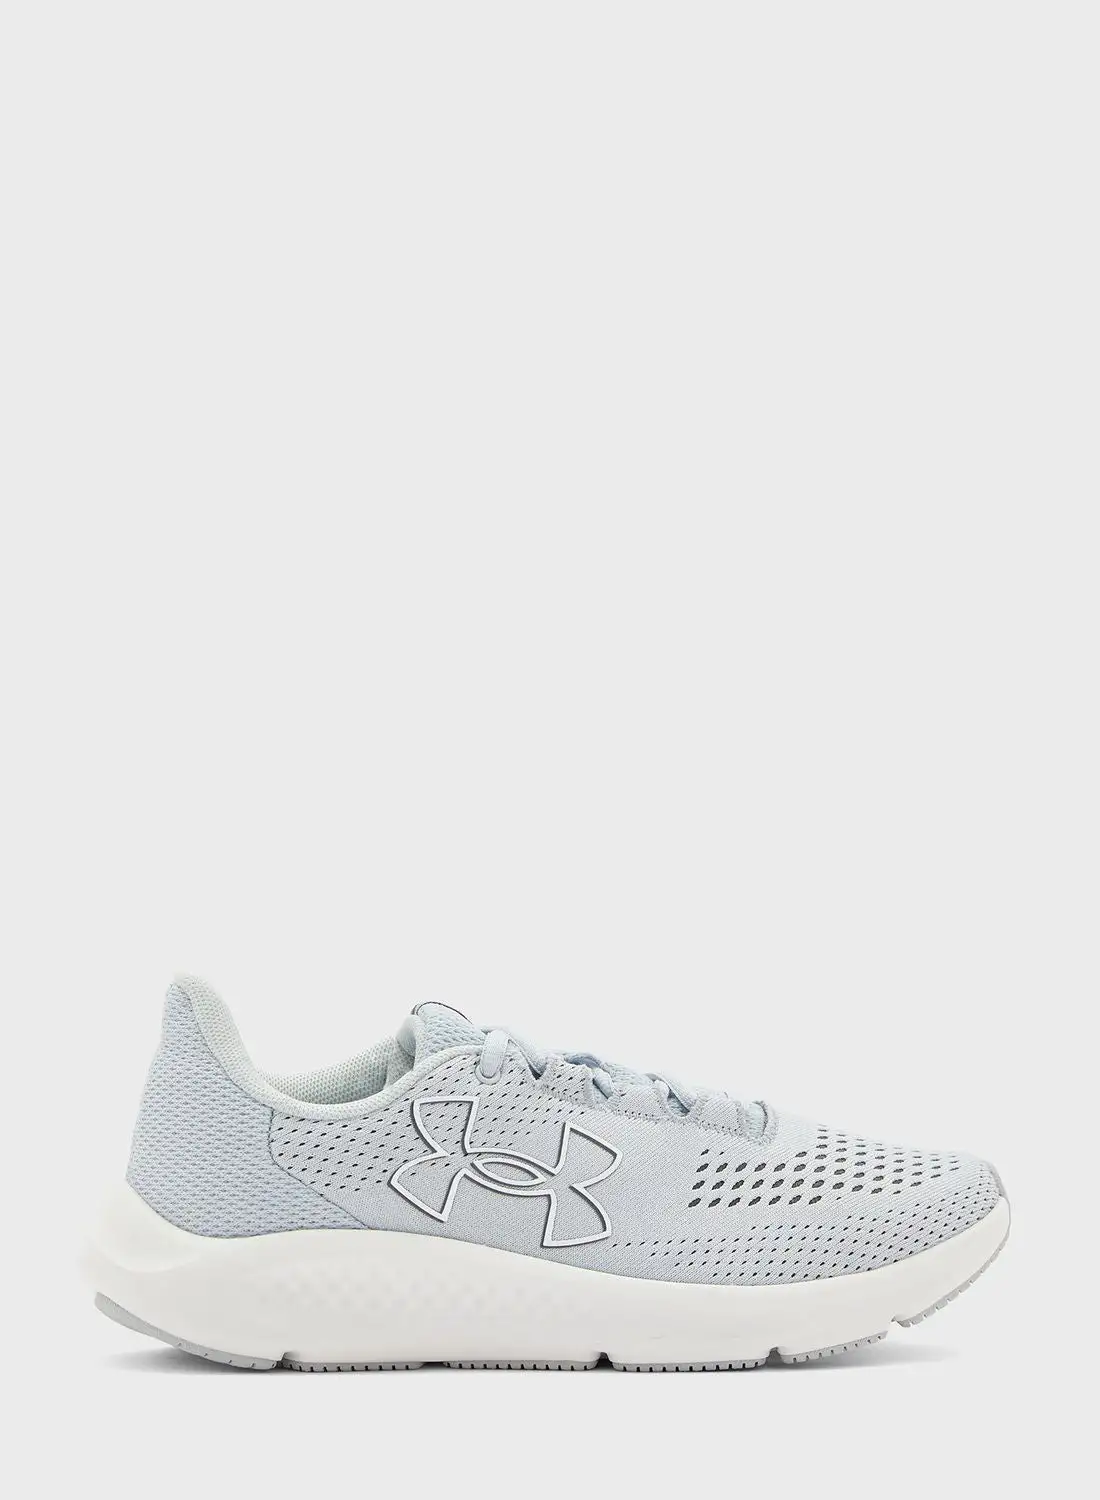 UNDER ARMOUR Charged Pursuit 3 Bl